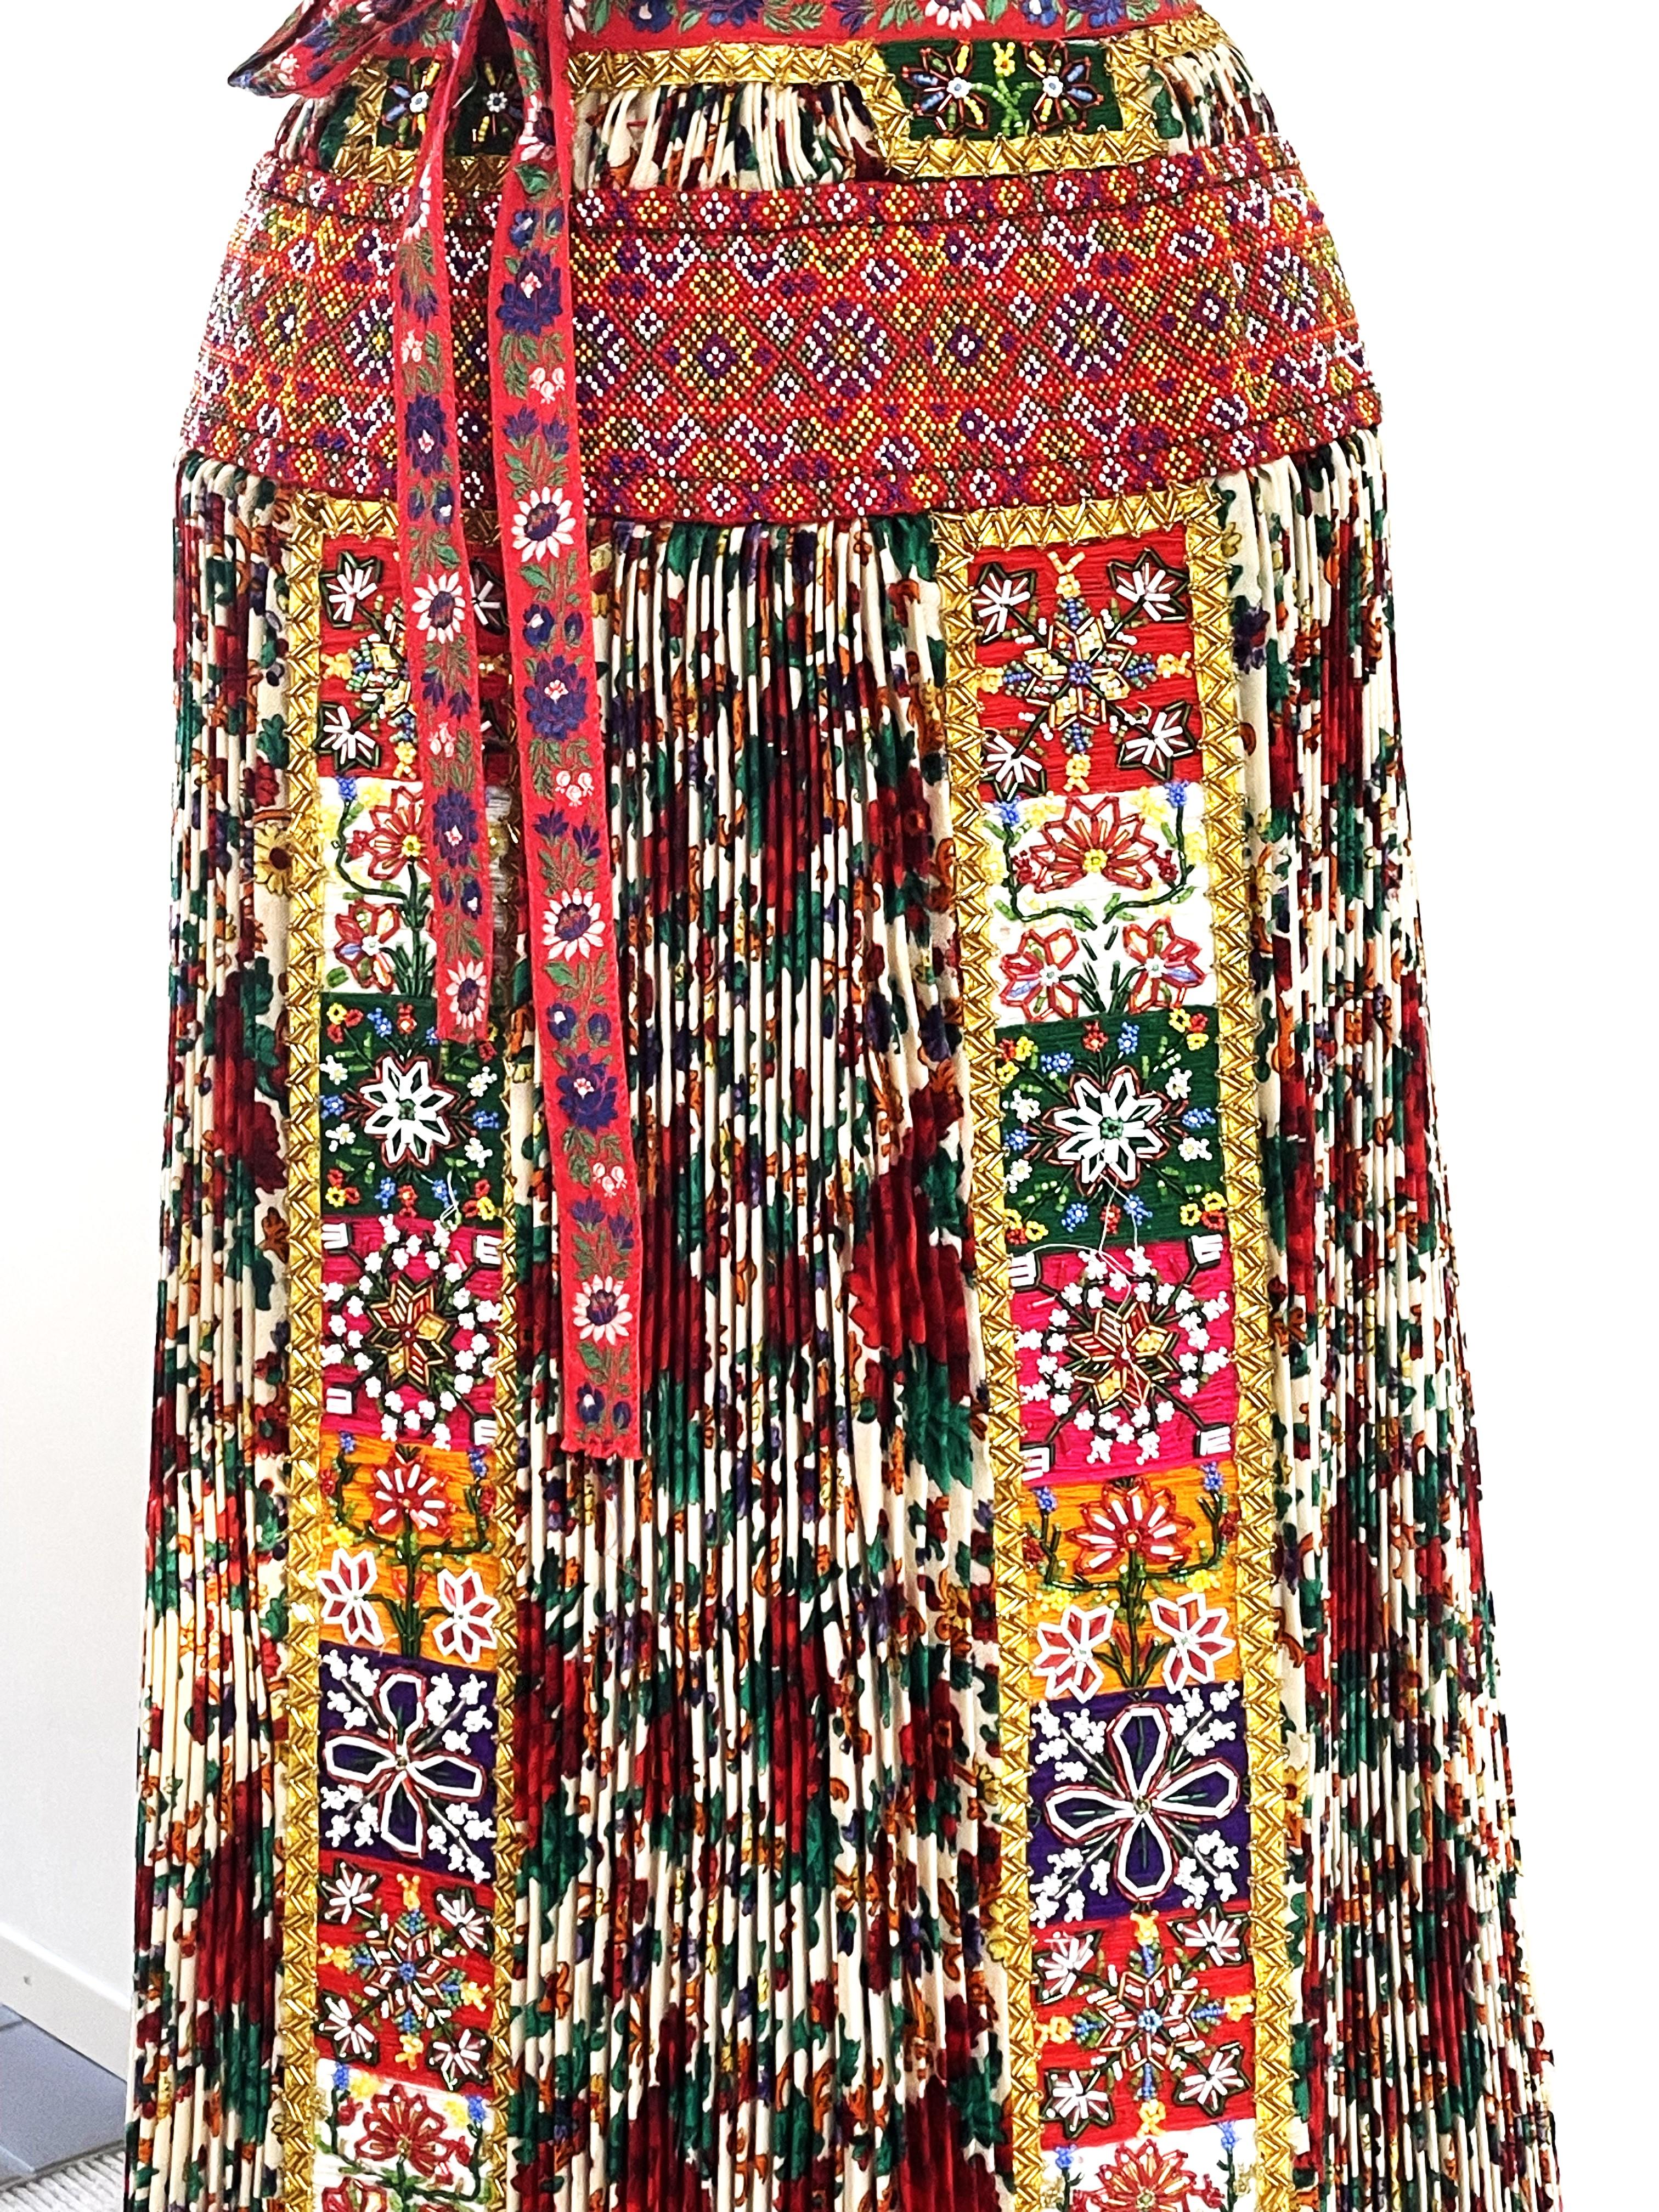  Hungarian traditional Shirt and Apron, embroiderd by hand with pealrs, 1940s For Sale 6